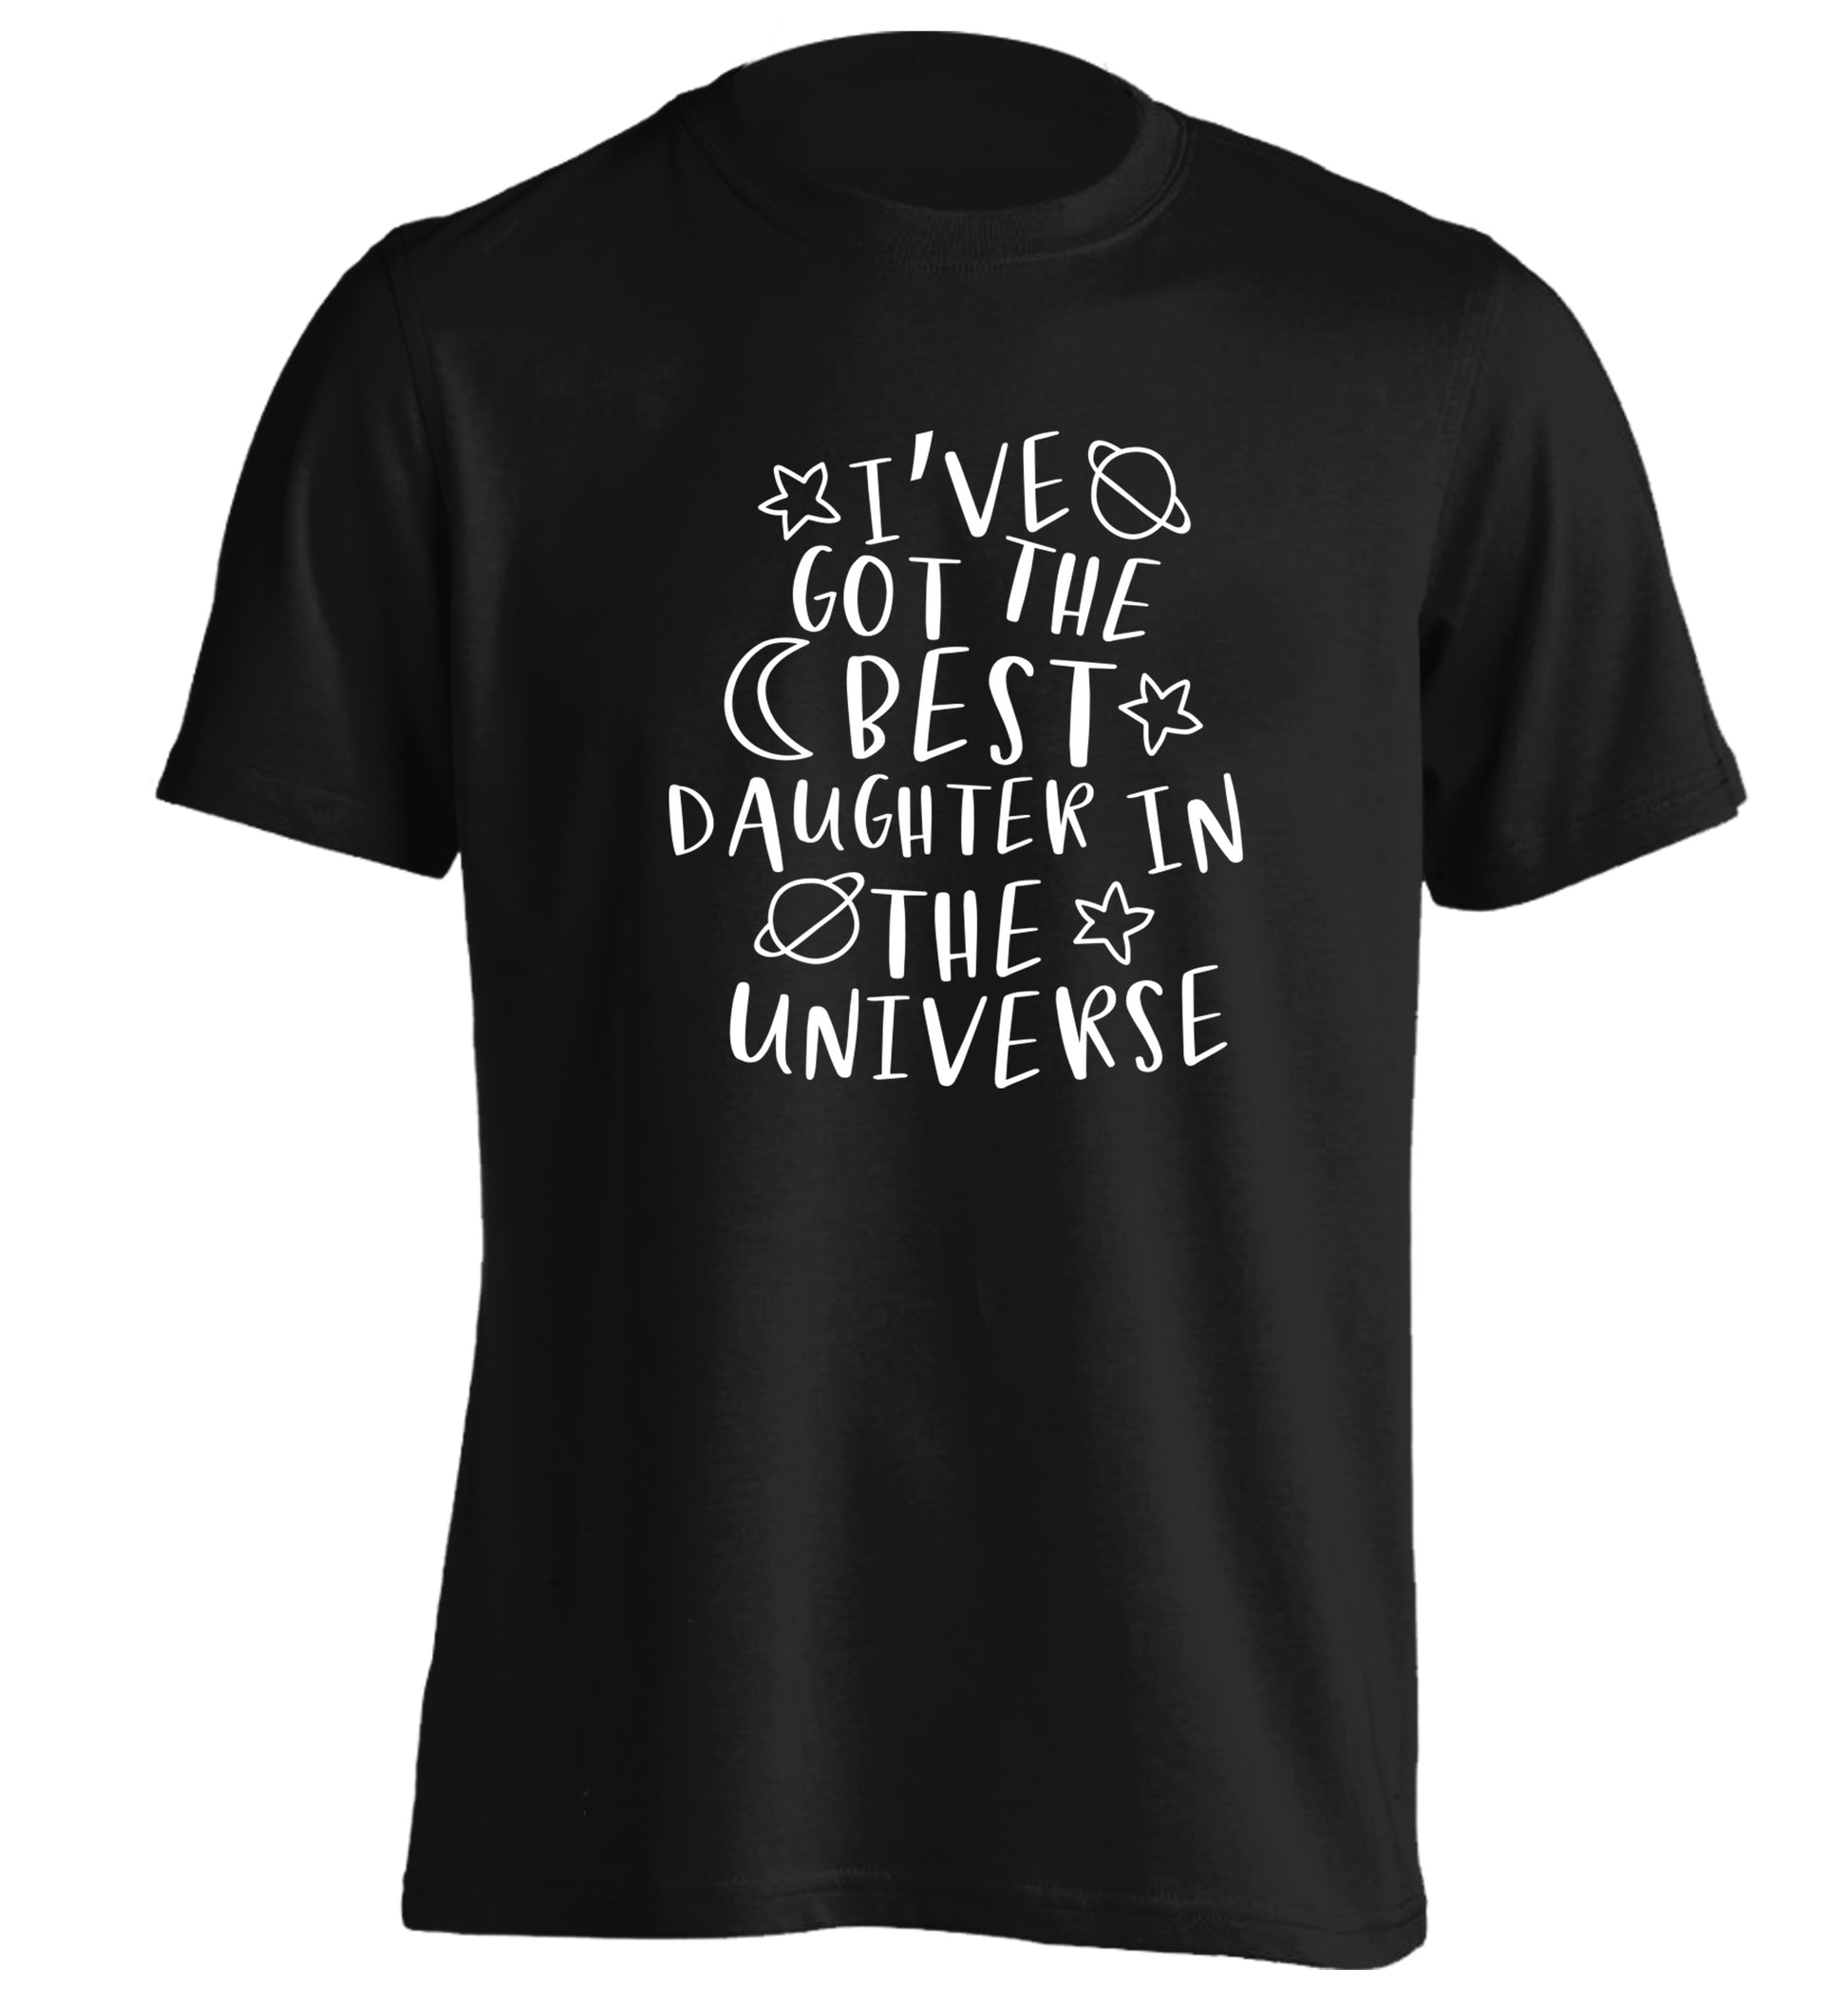 I've got the best daughter in the universe adults unisex black Tshirt 2XL